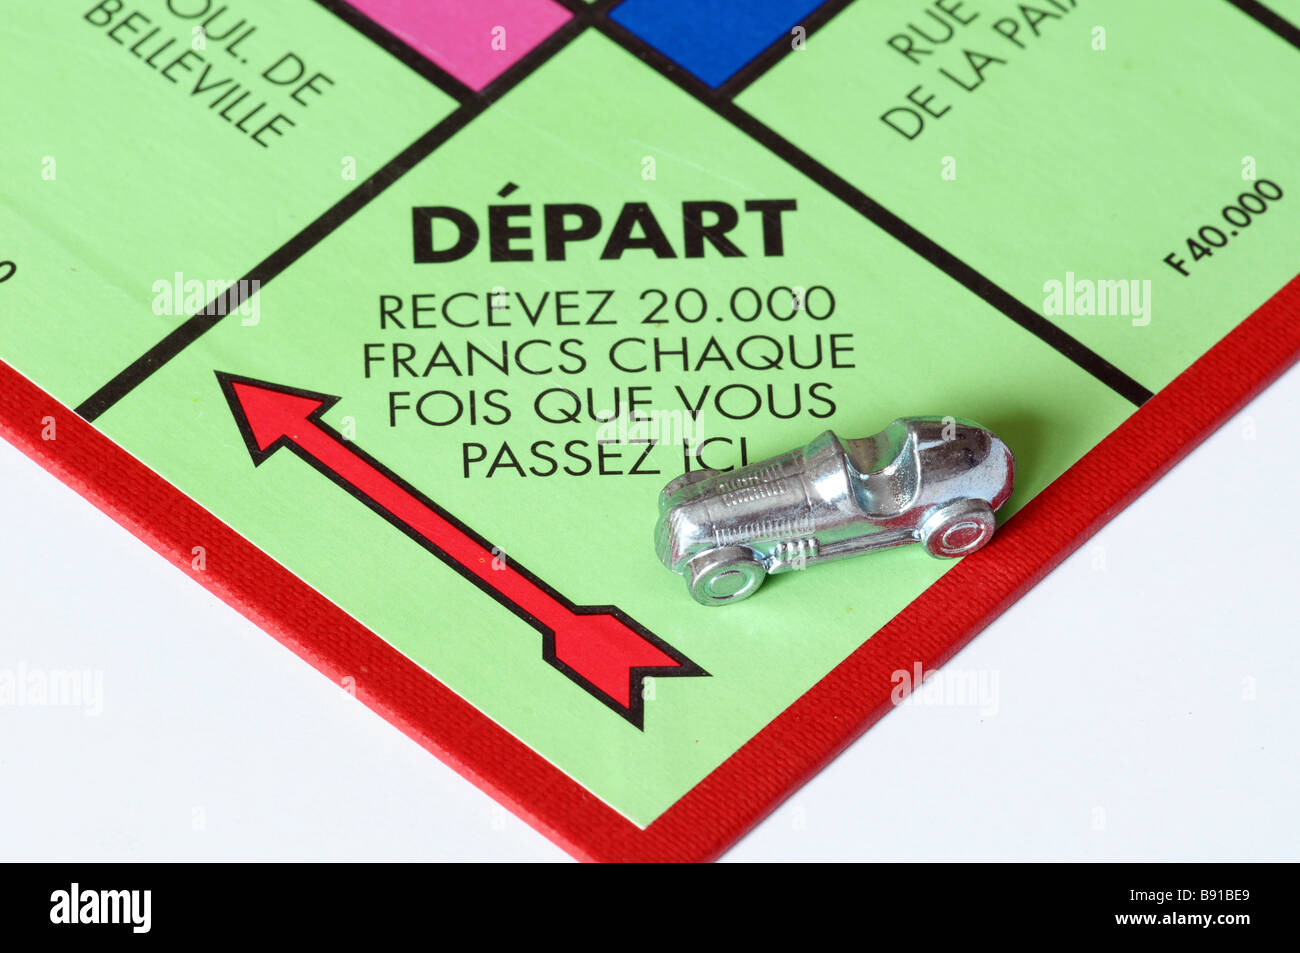 French monopoly board, passing Go. Stock Photo